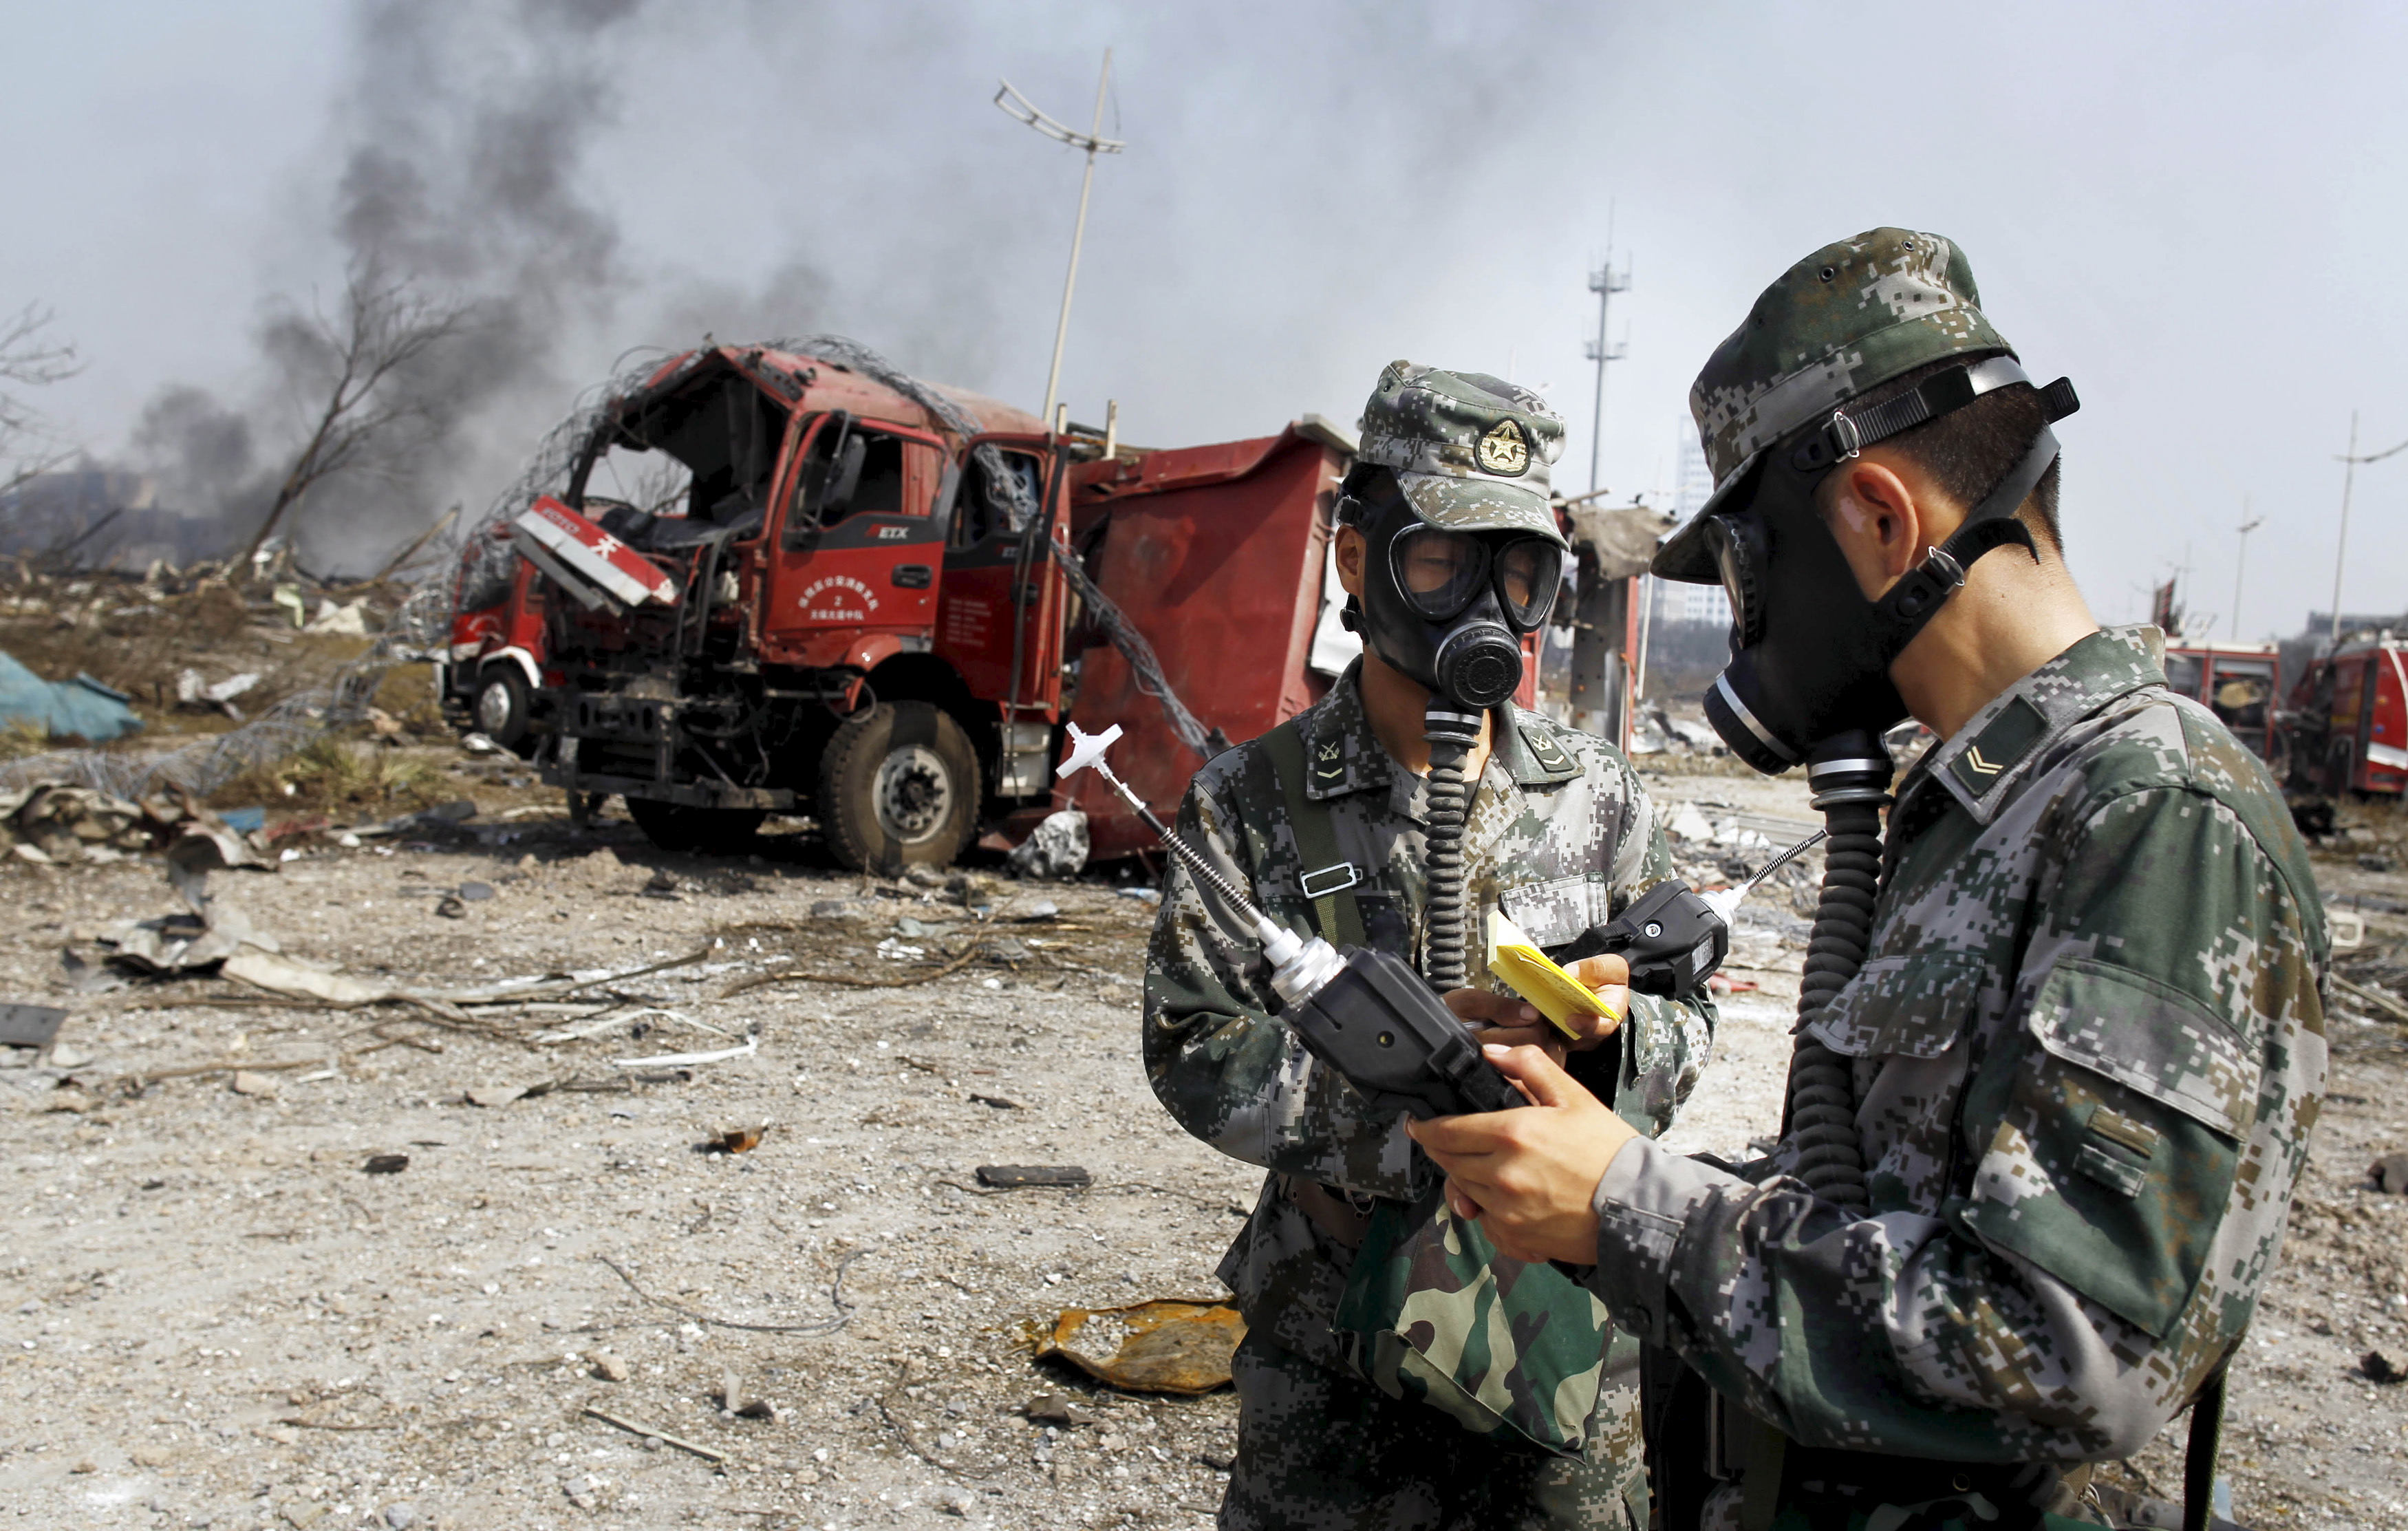 Soldiers of the People's Liberation Army antichemical-warfare corps work next to a damaged firefighting vehicle at the site of the Aug. 12 explosions at Binhai new district in Tianjin, China, on Aug. 16, 2015. (China Daily/Reuters)